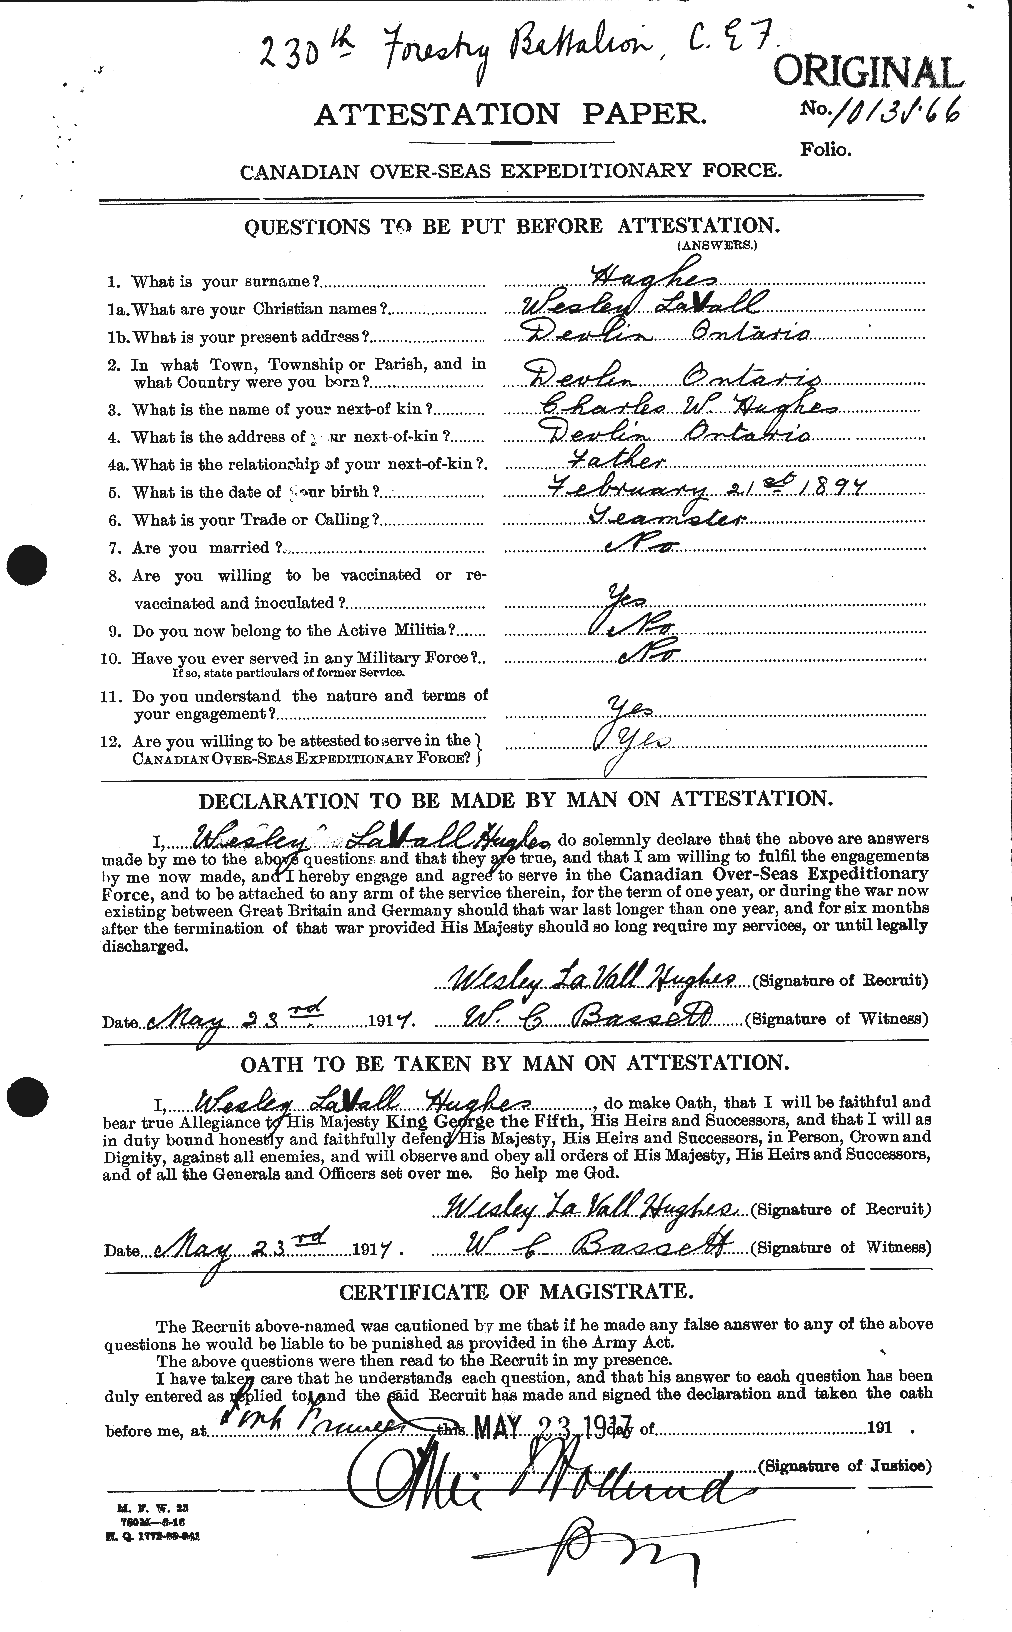 Personnel Records of the First World War - CEF 405868a